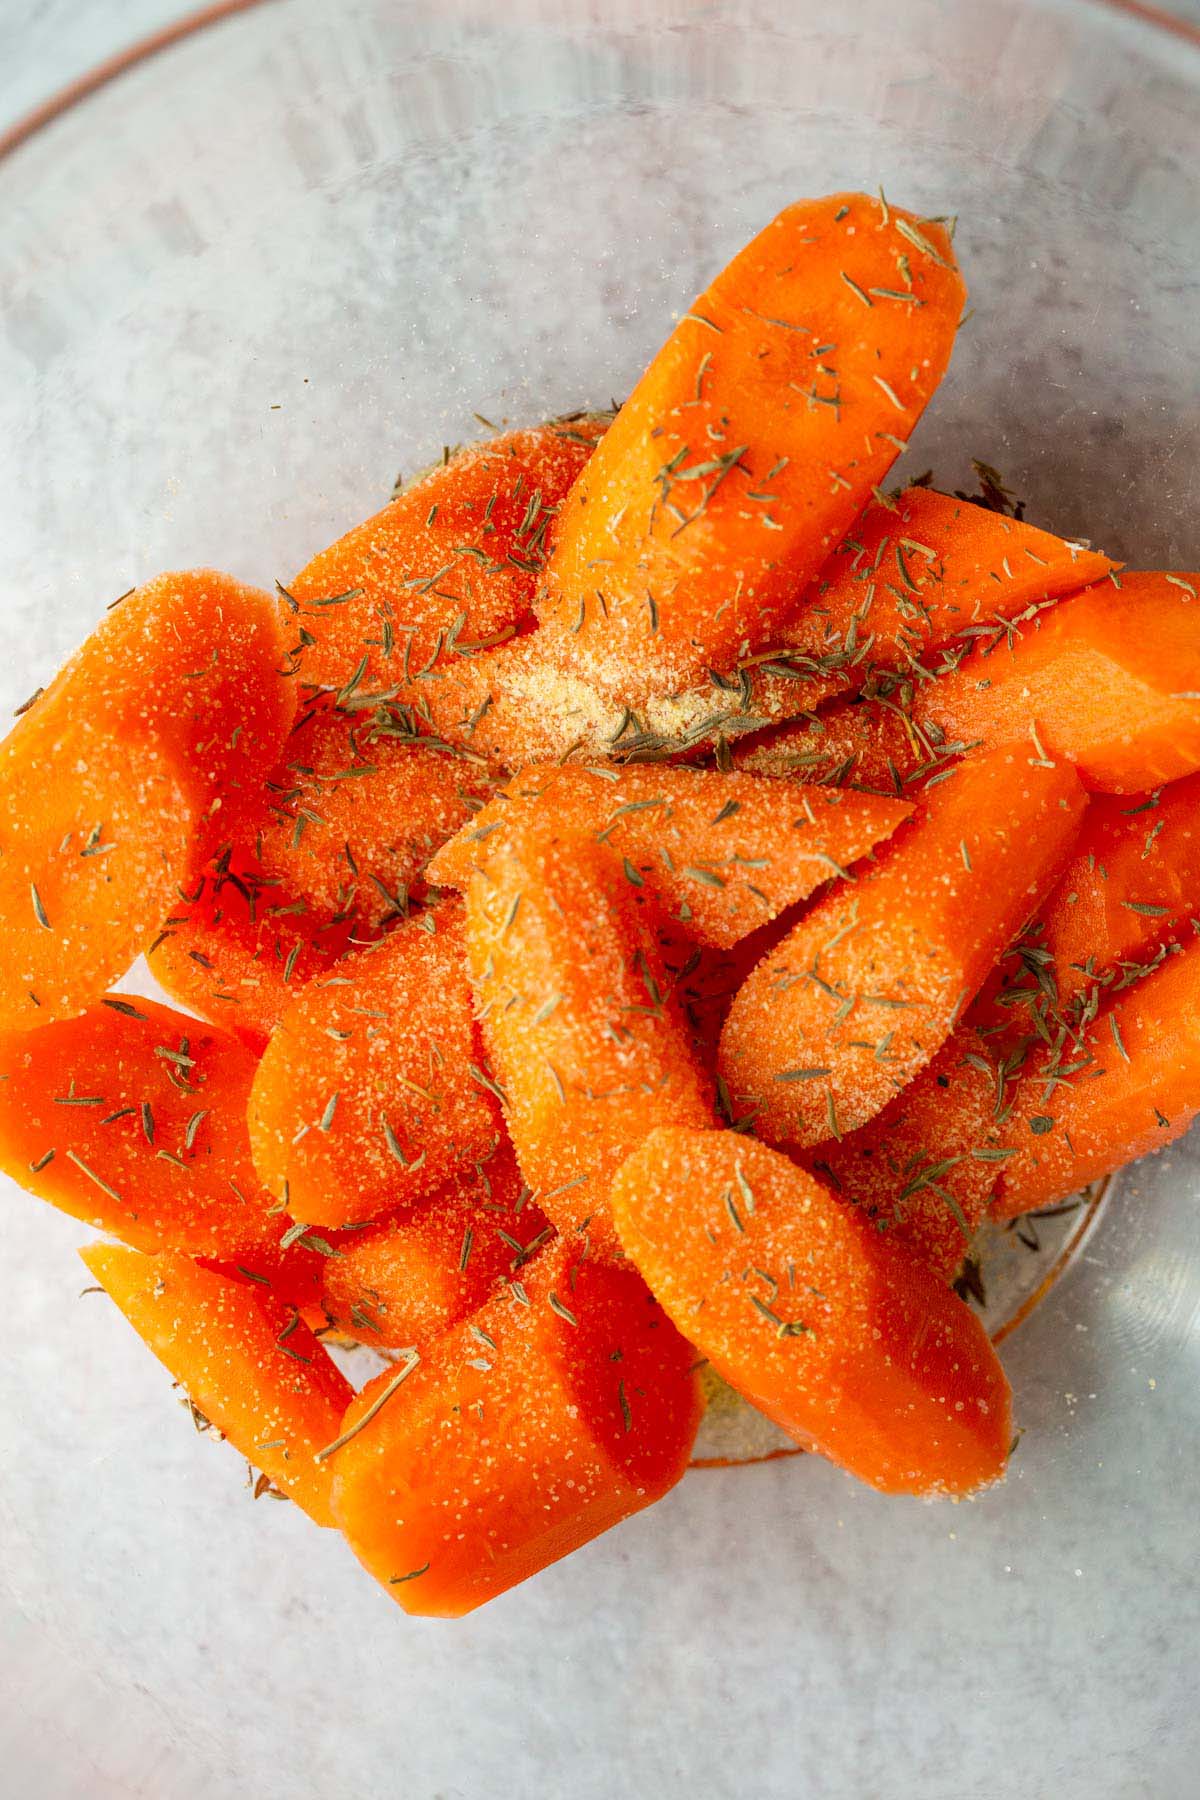 Carrots with seasonings in a bowl